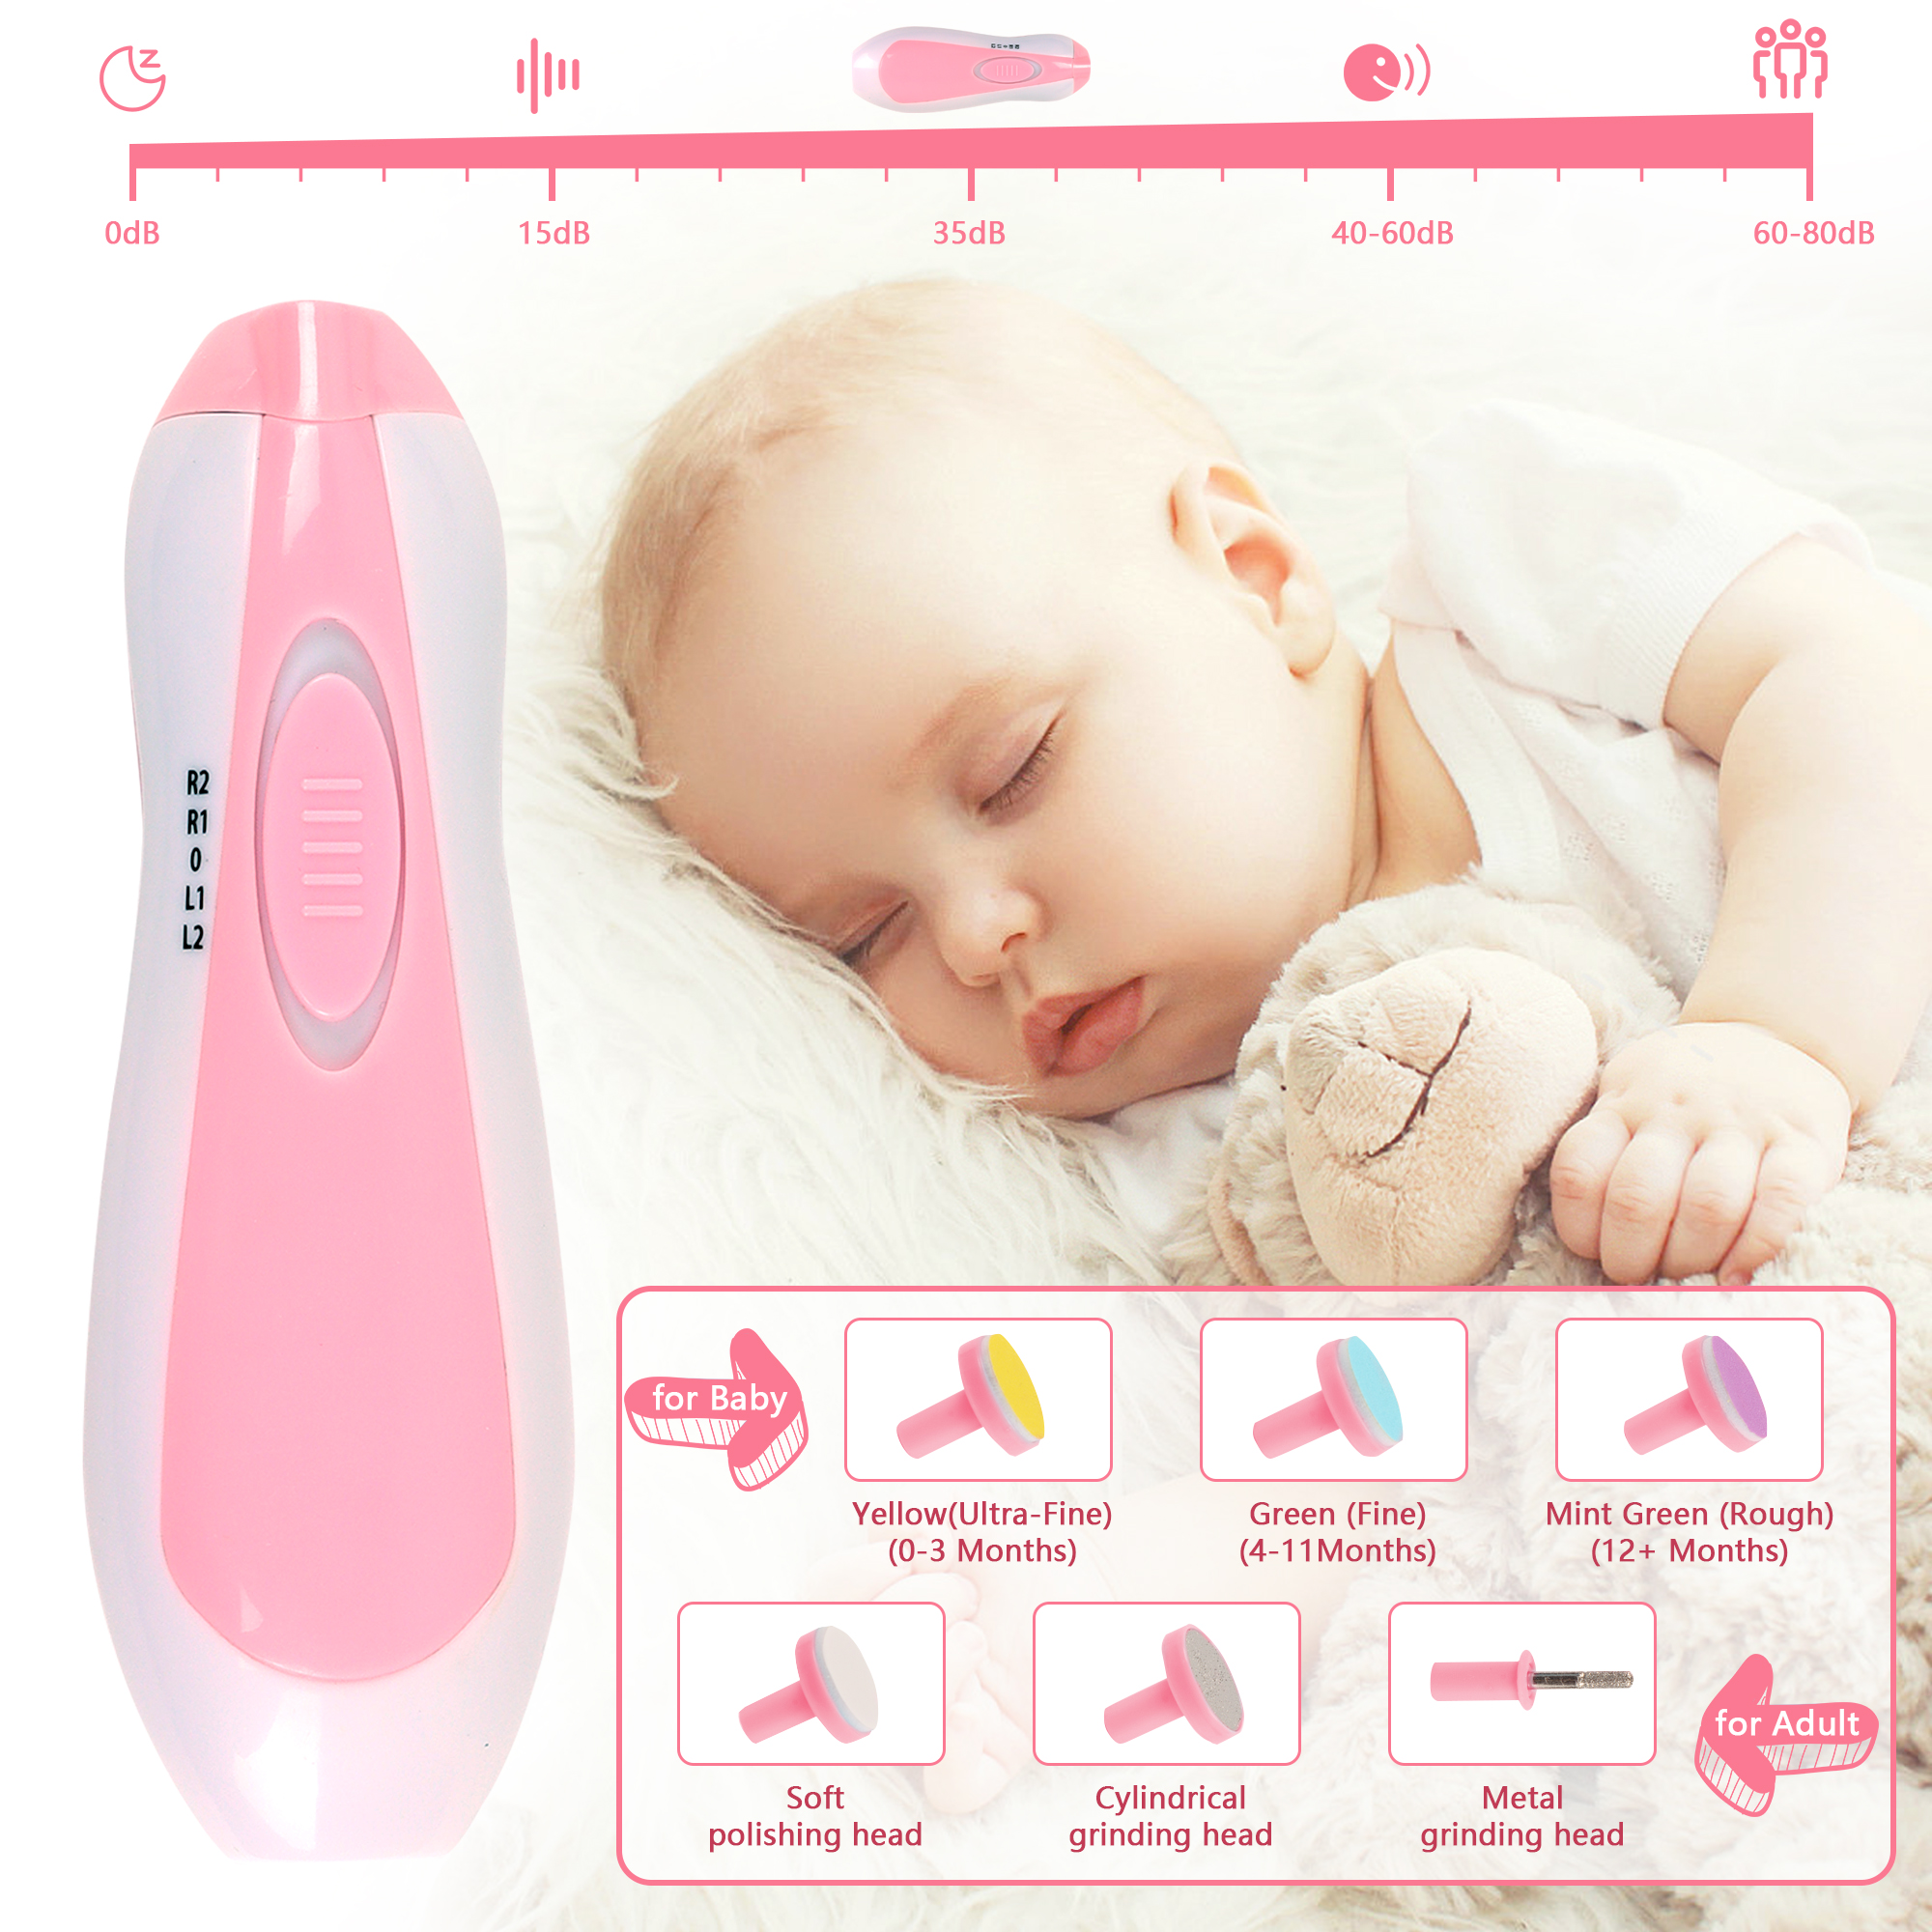 Baby Healthcare and Grooming Kit,20 in 1 Electric Safety Nail Trimmer Baby Nursery Set Newborn Nursery Health Care Set with Hair Brush Comb for Infant Toddlers Kids Baby Shower Gifts-Pink - image 2 of 7